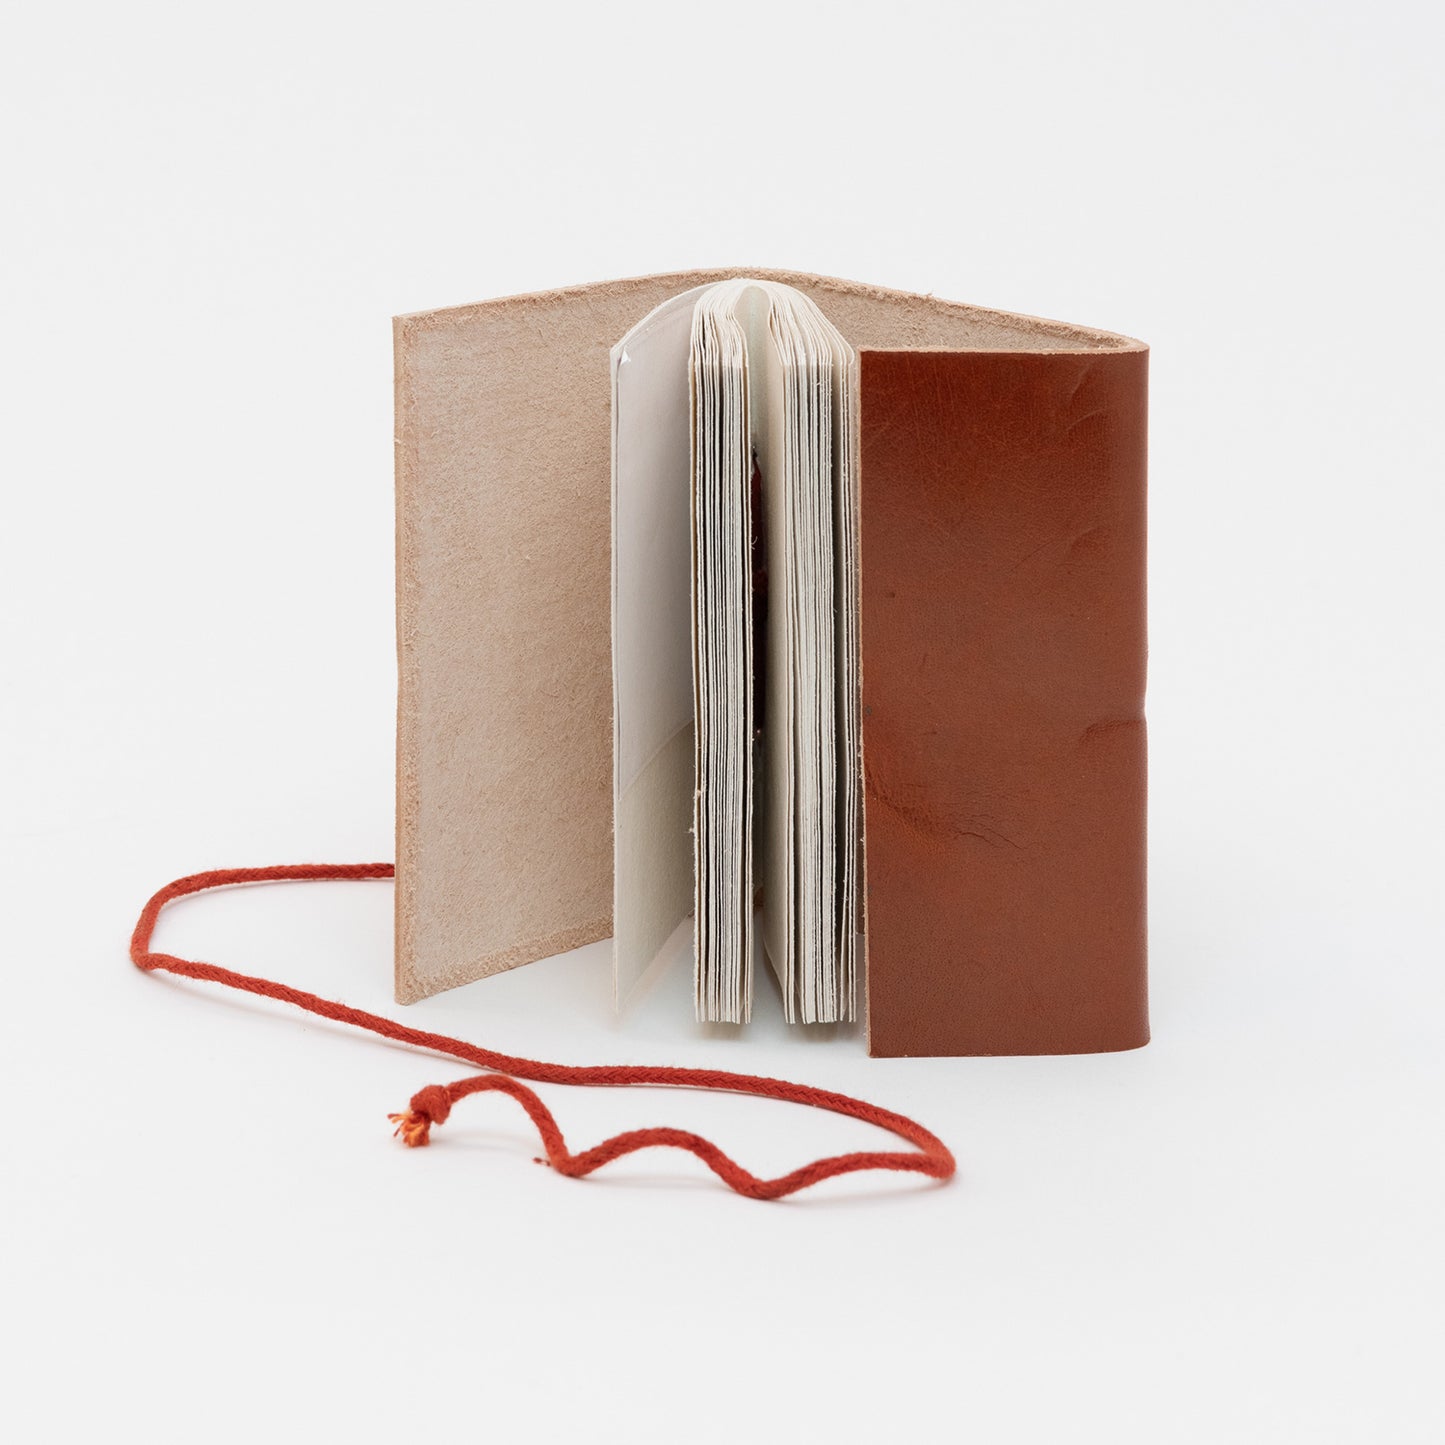 The small tan leather journal open on its side with unlined pages on view.